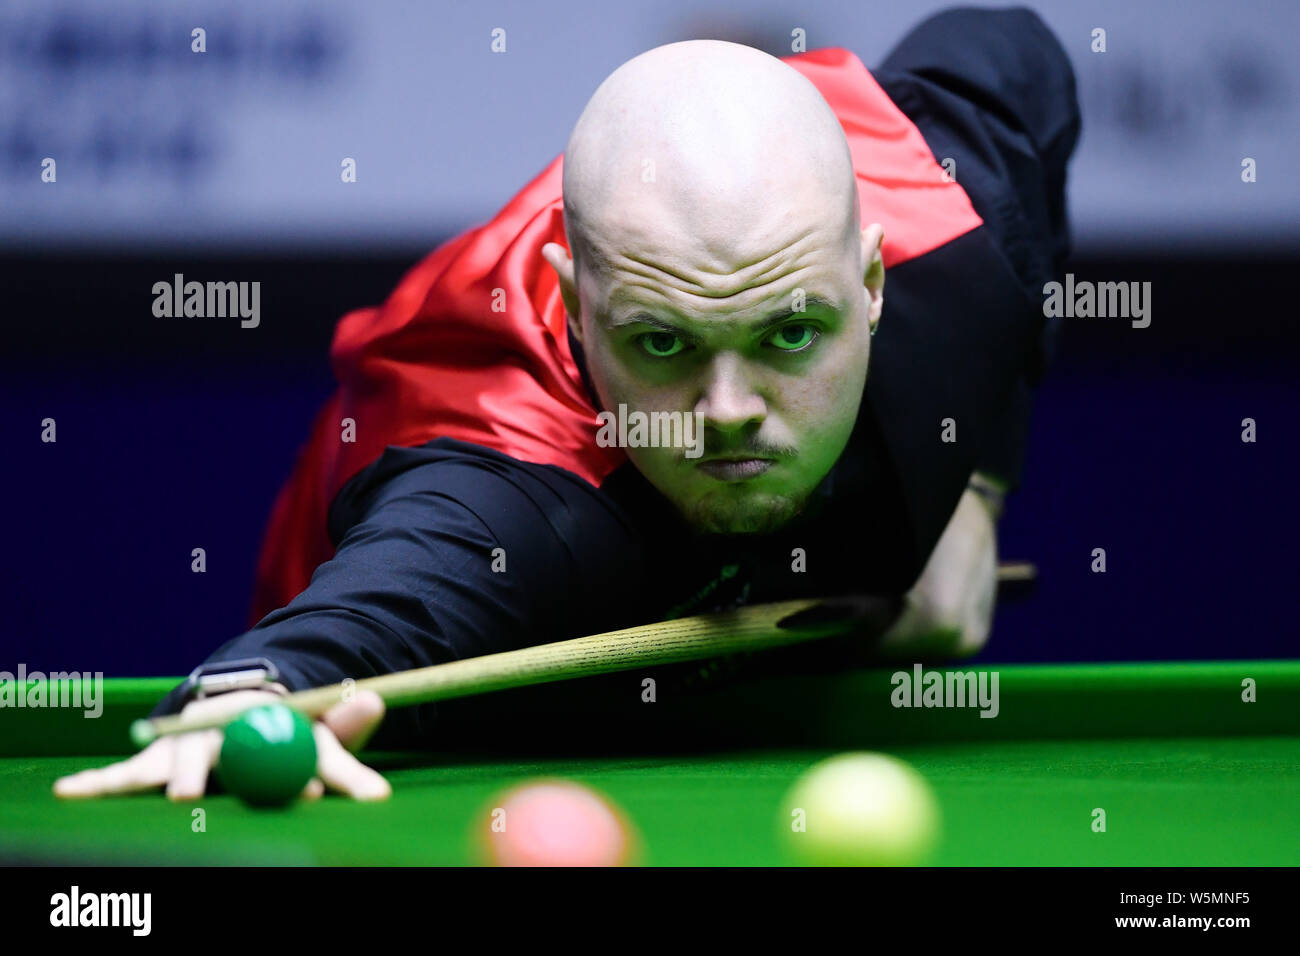 Elliot Slessor of England plays a shot to Stuart Bingham of England in the first round match during the Xingpai Group 2019 World Snooker China Open in Stock Photo